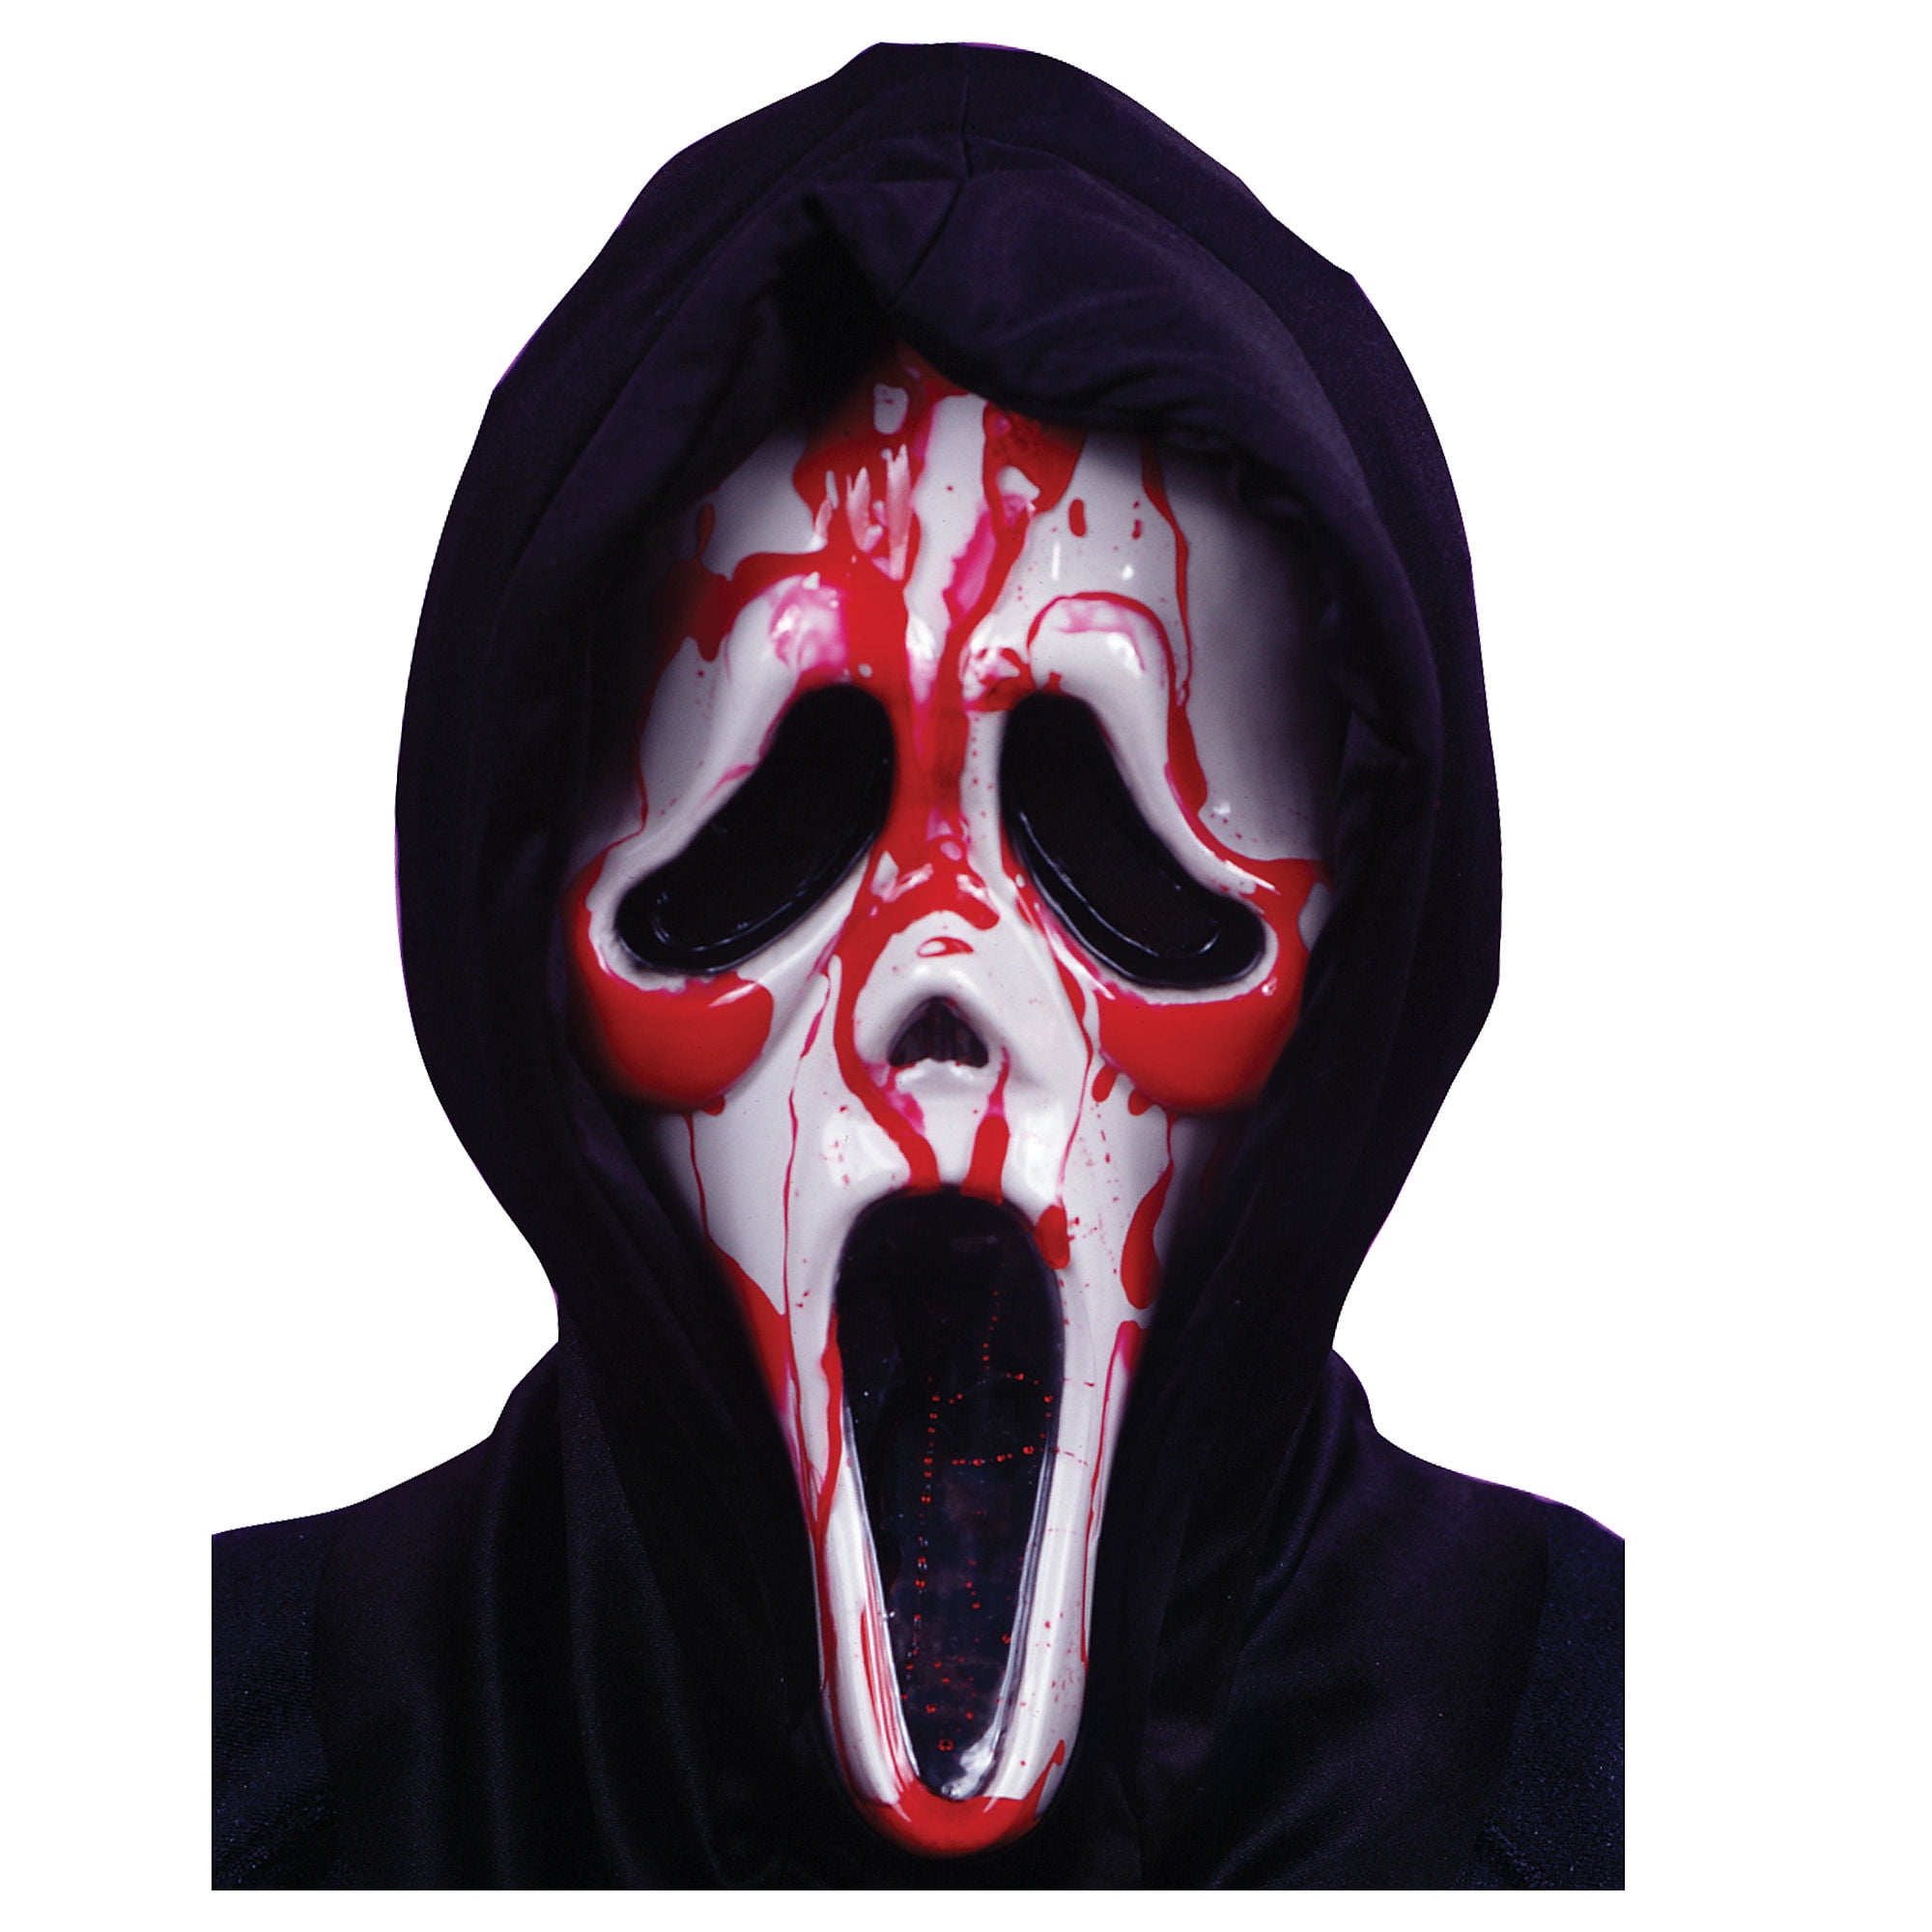 HALLOWEEN HORROR MOVIE PROP Bloody Skinned Face Mask 